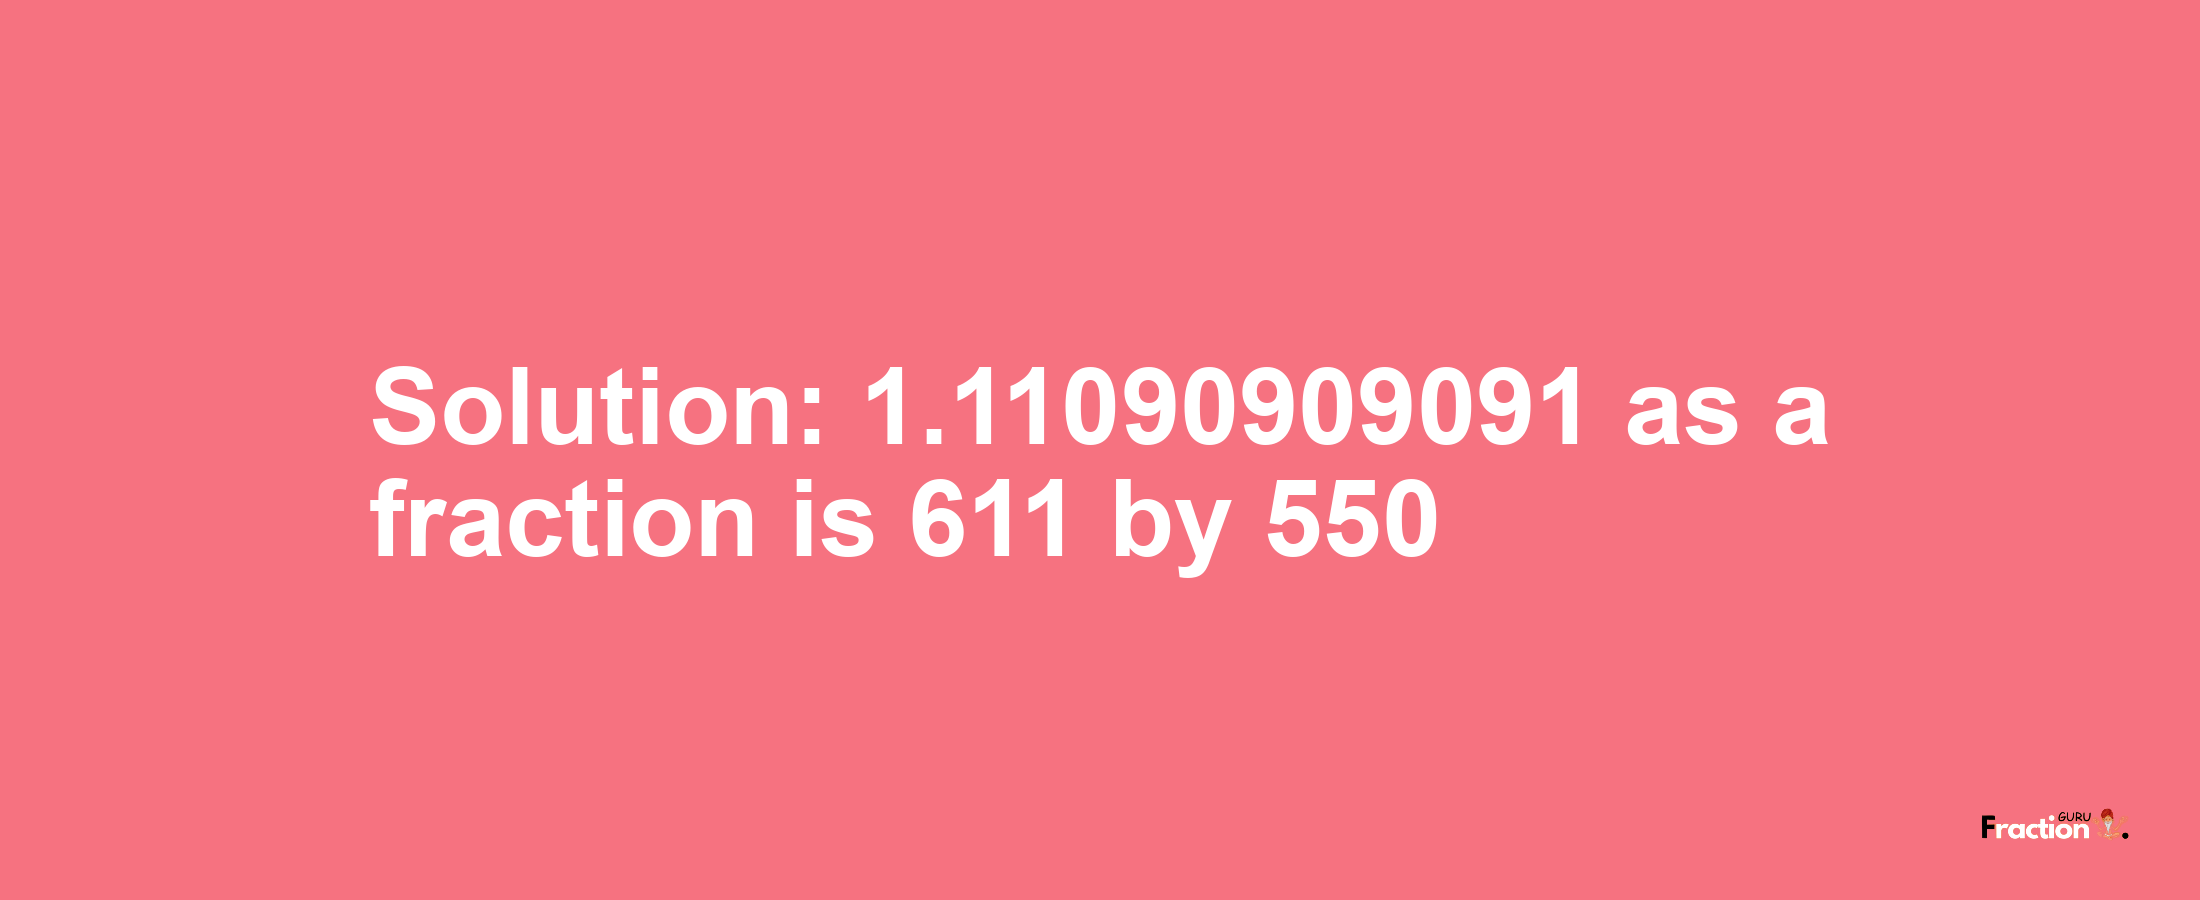 Solution:1.11090909091 as a fraction is 611/550